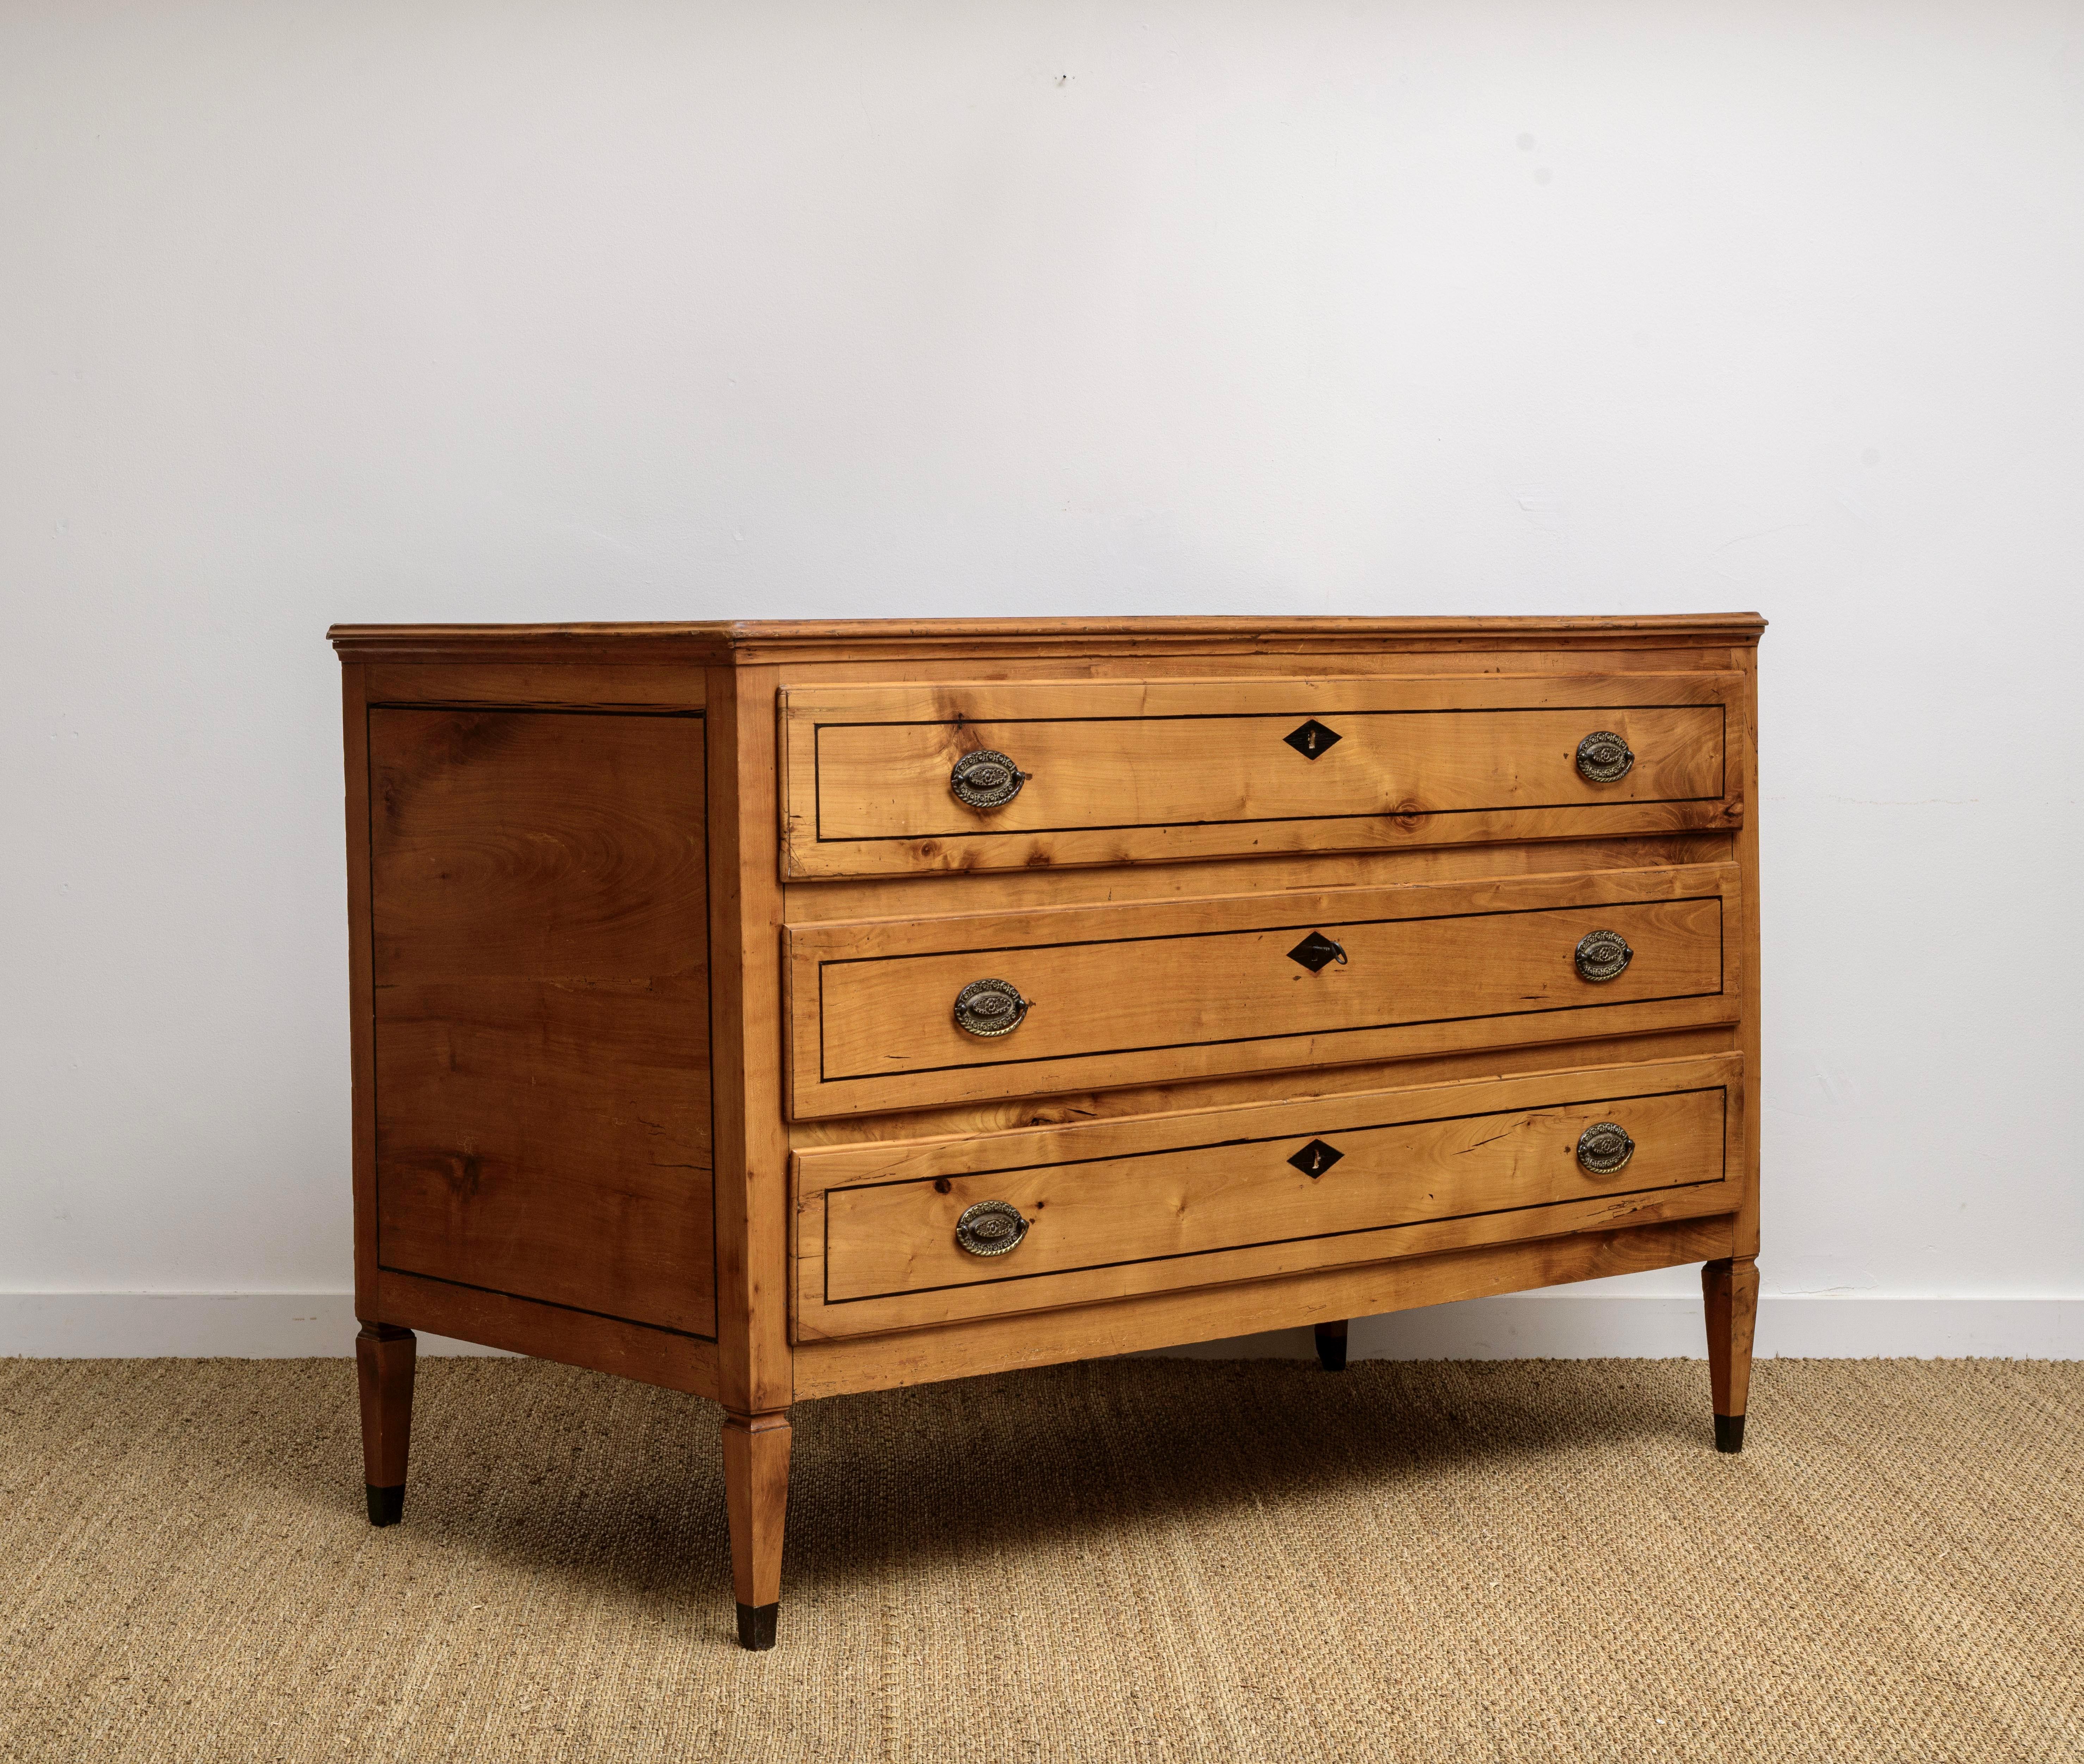 Neoclassical Italian Cherry Neoclacial-style Commode For Sale